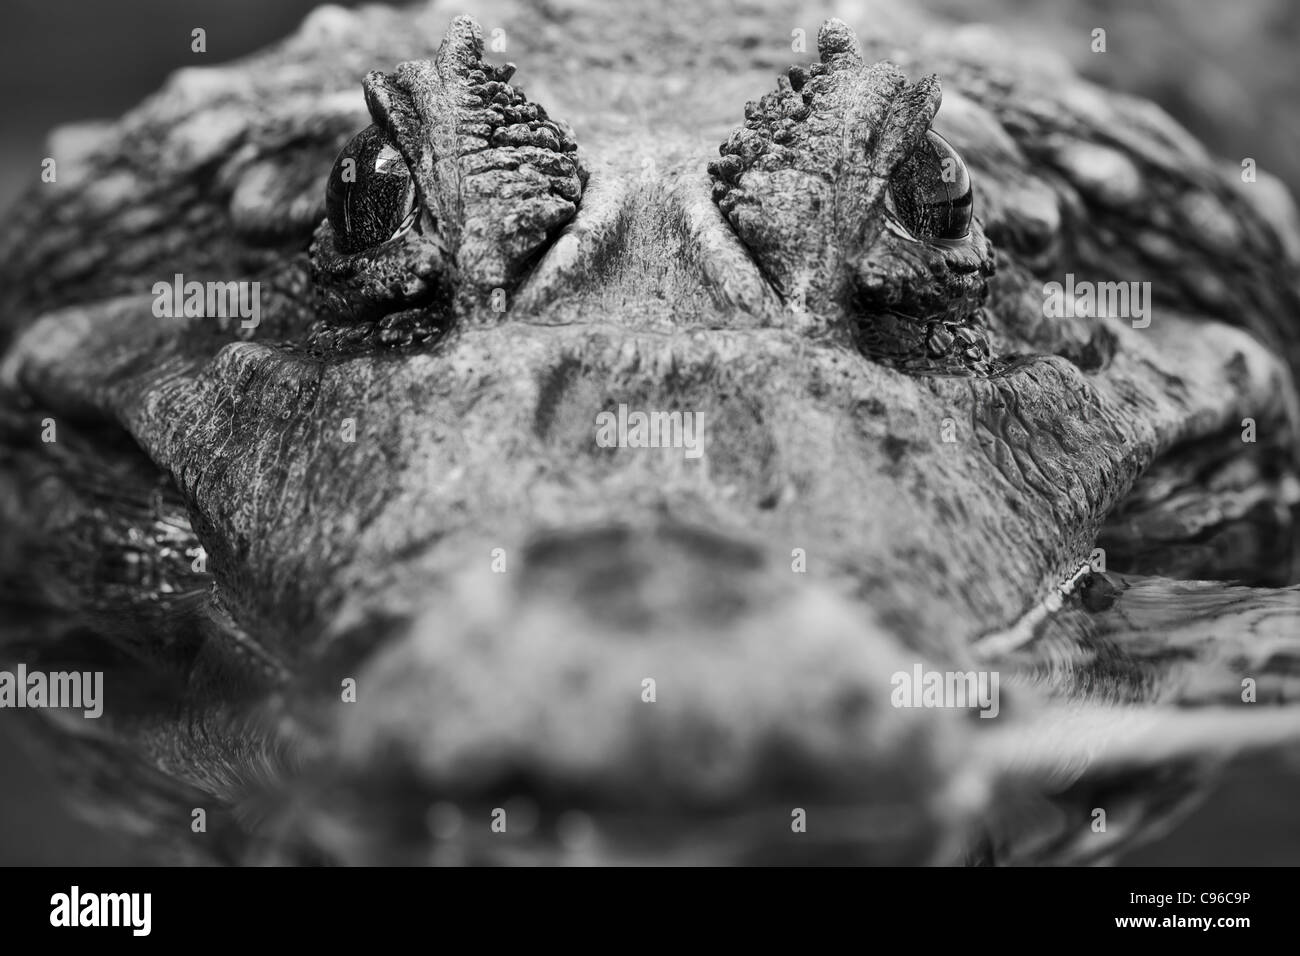 Close Up Of An Adult Male Caiman Shallow Depth Of Field Focus On His Eye Stock Photo